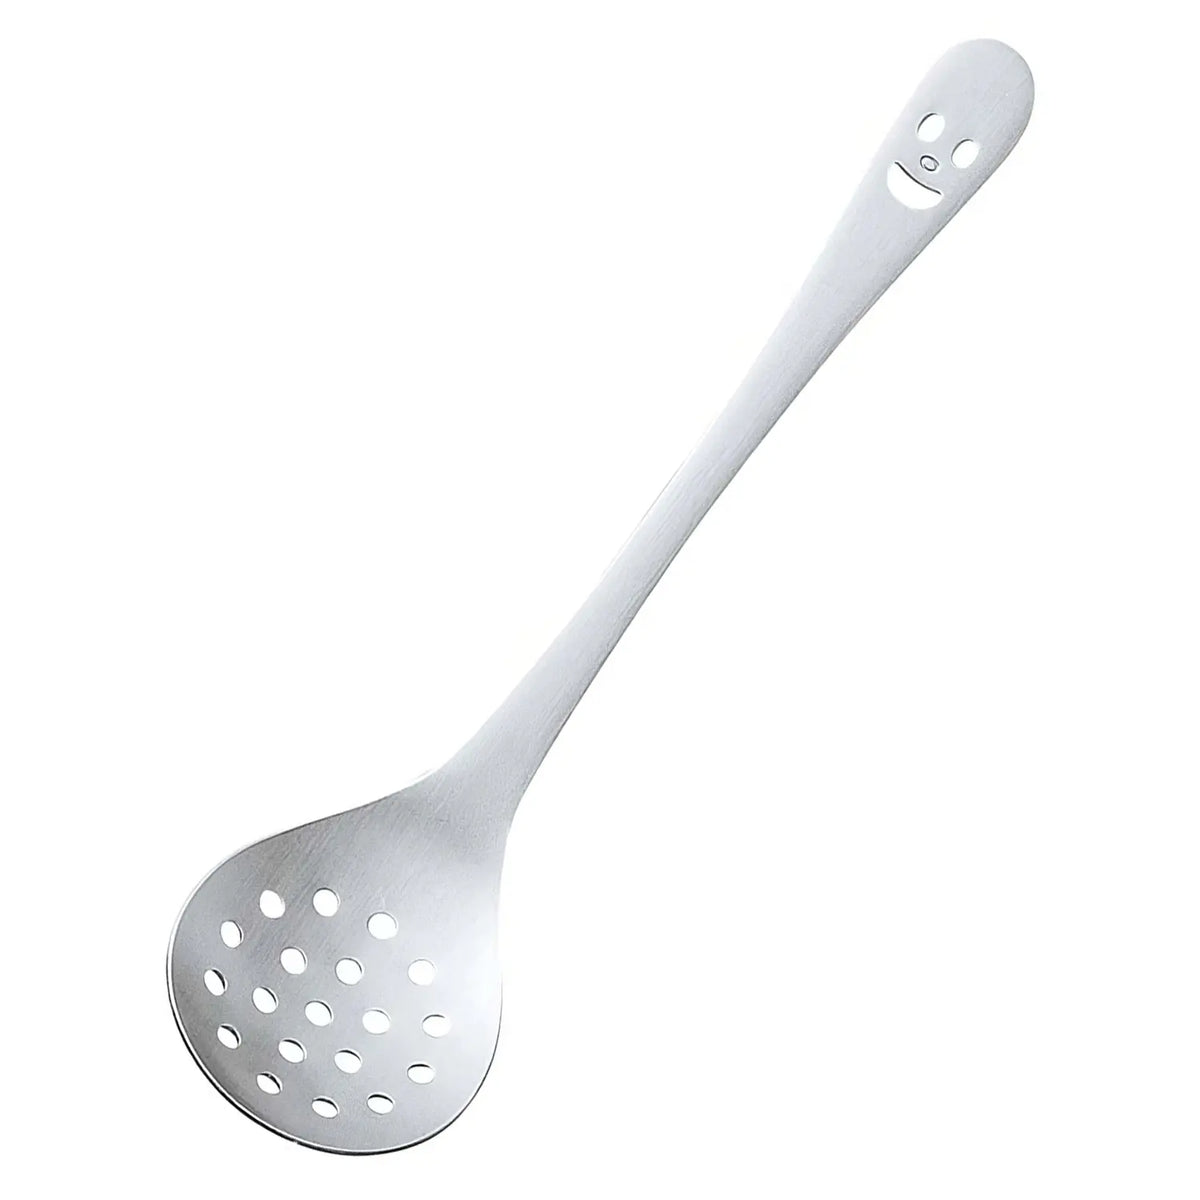 Wada Nico Stainless Steel Perforated Server Spoon 6.5cm